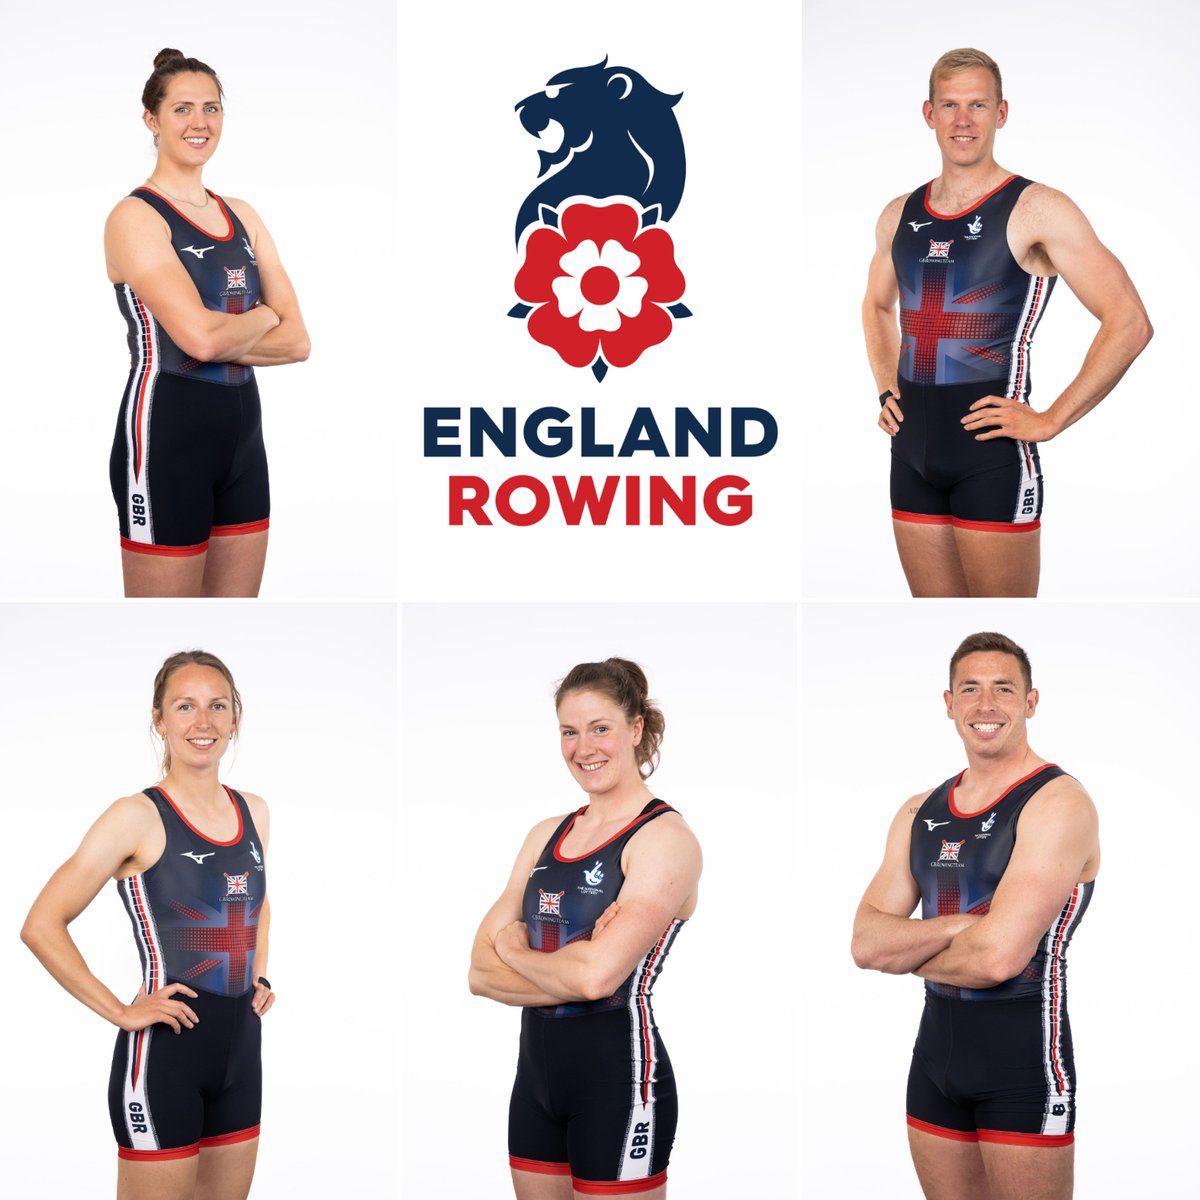 Wishing the best of luck to everyone representing the #GBRowingTeam🇬🇧 at the European Rowing Championships in Slovenia! 🇸🇮

A special shout-out to Matt Haywood, Seb Devereux, Samantha Redgrave, Annie Campbell-Ord and Georgie Brayshaw who have all rowed for England🏴󠁧󠁢󠁥󠁮󠁧󠁿!